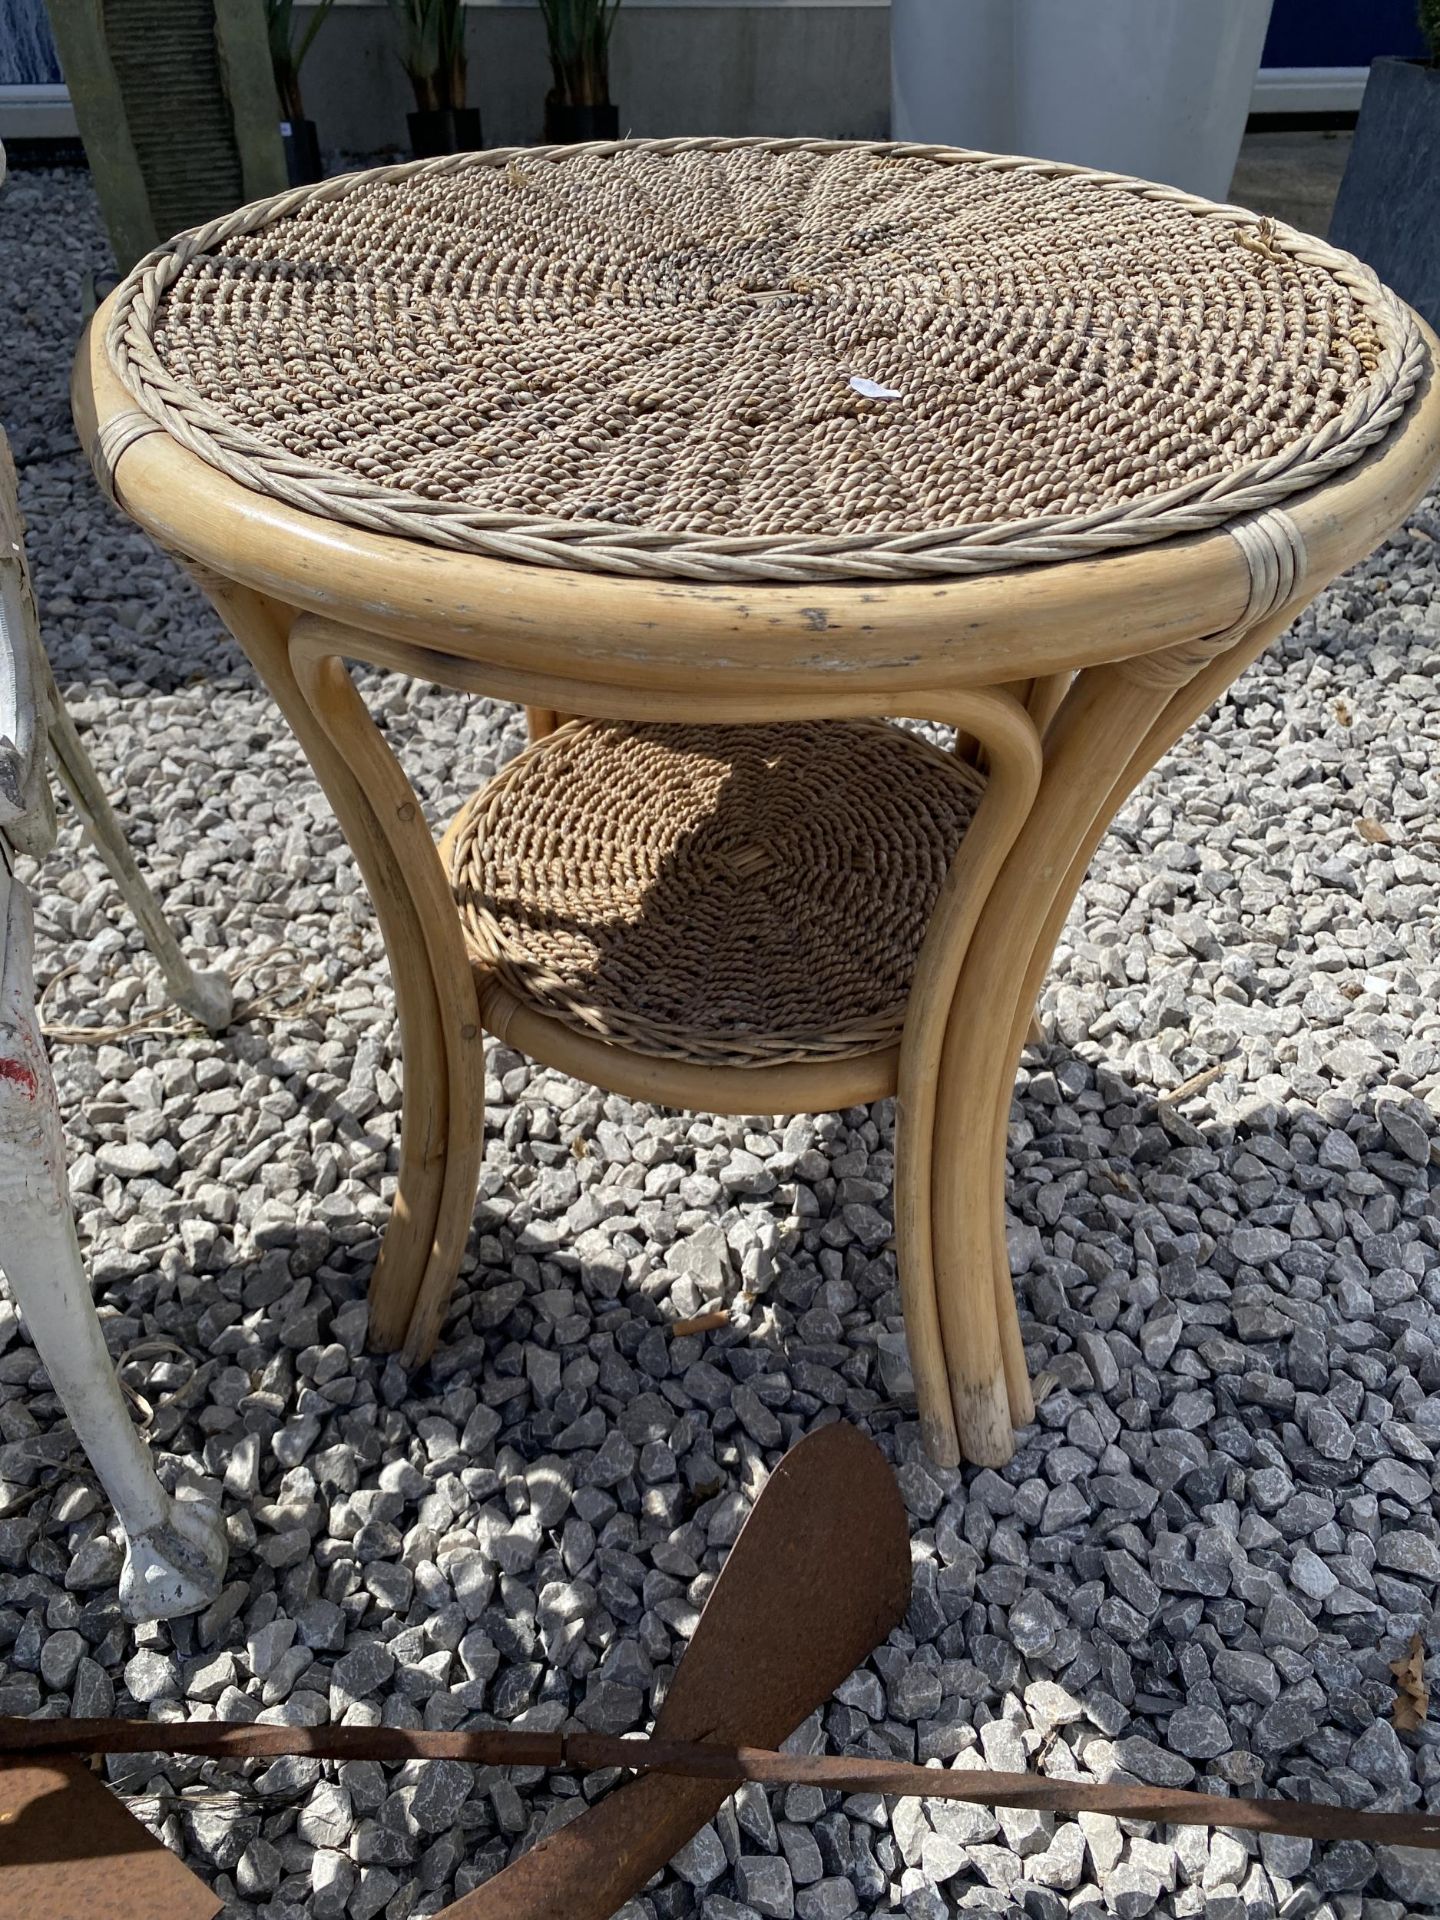 THREE GARDEN ITEMS TO INCLUDE A BISTRO CHAIR, CIRCULAR WICKER SIDE TABLE AND STEEL AEROPLANE - Bild 2 aus 4